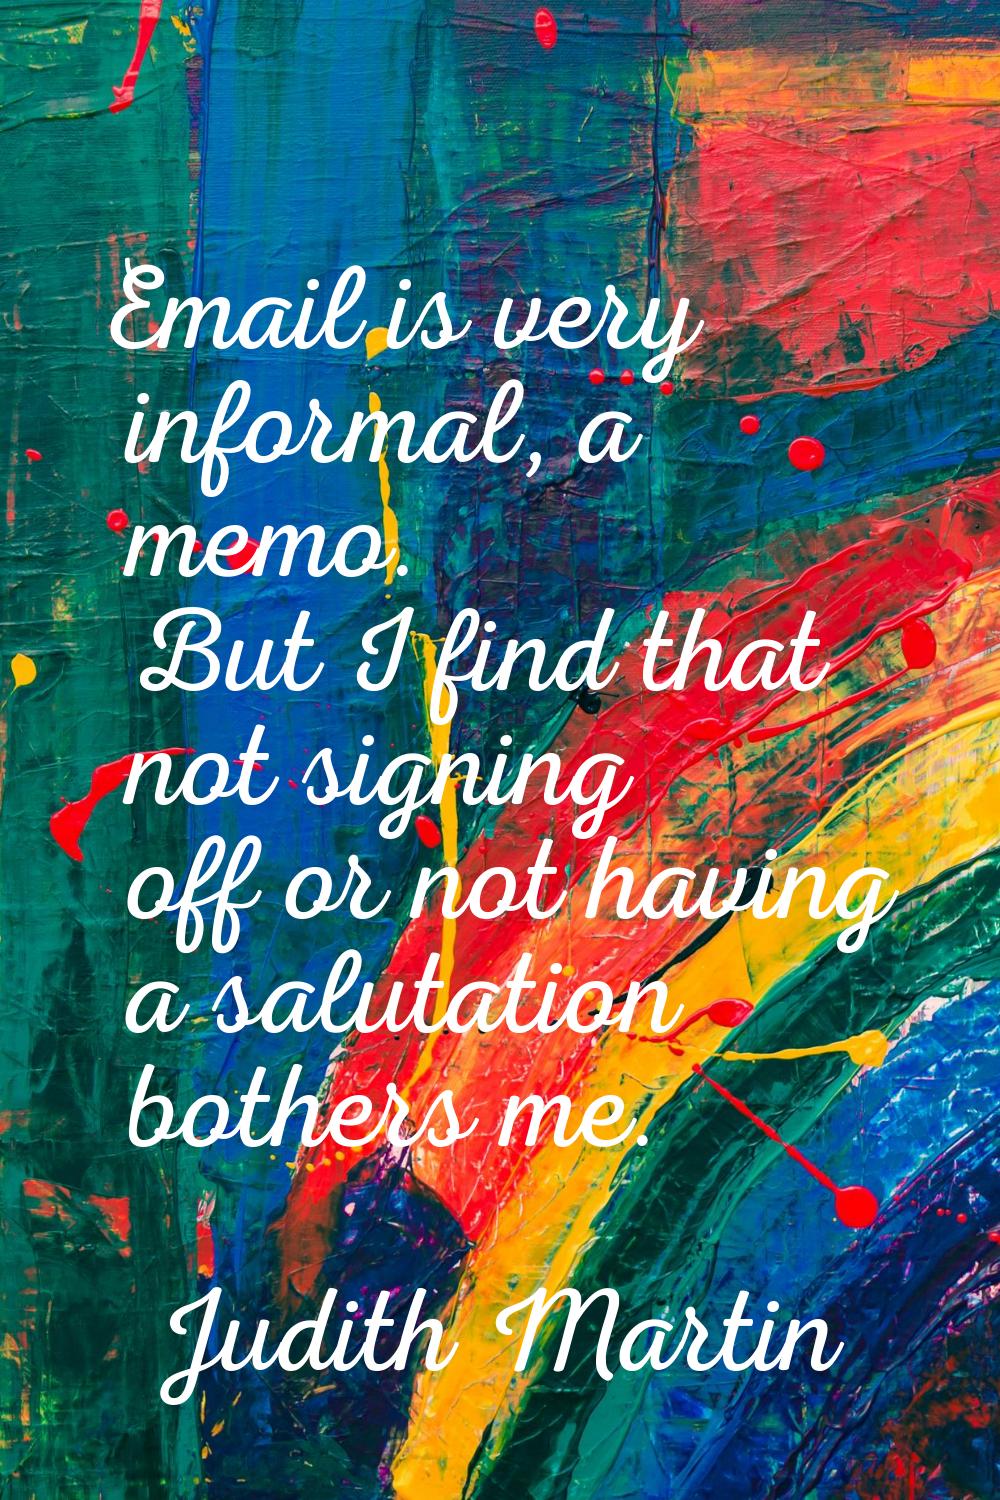 Email is very informal, a memo. But I find that not signing off or not having a salutation bothers 